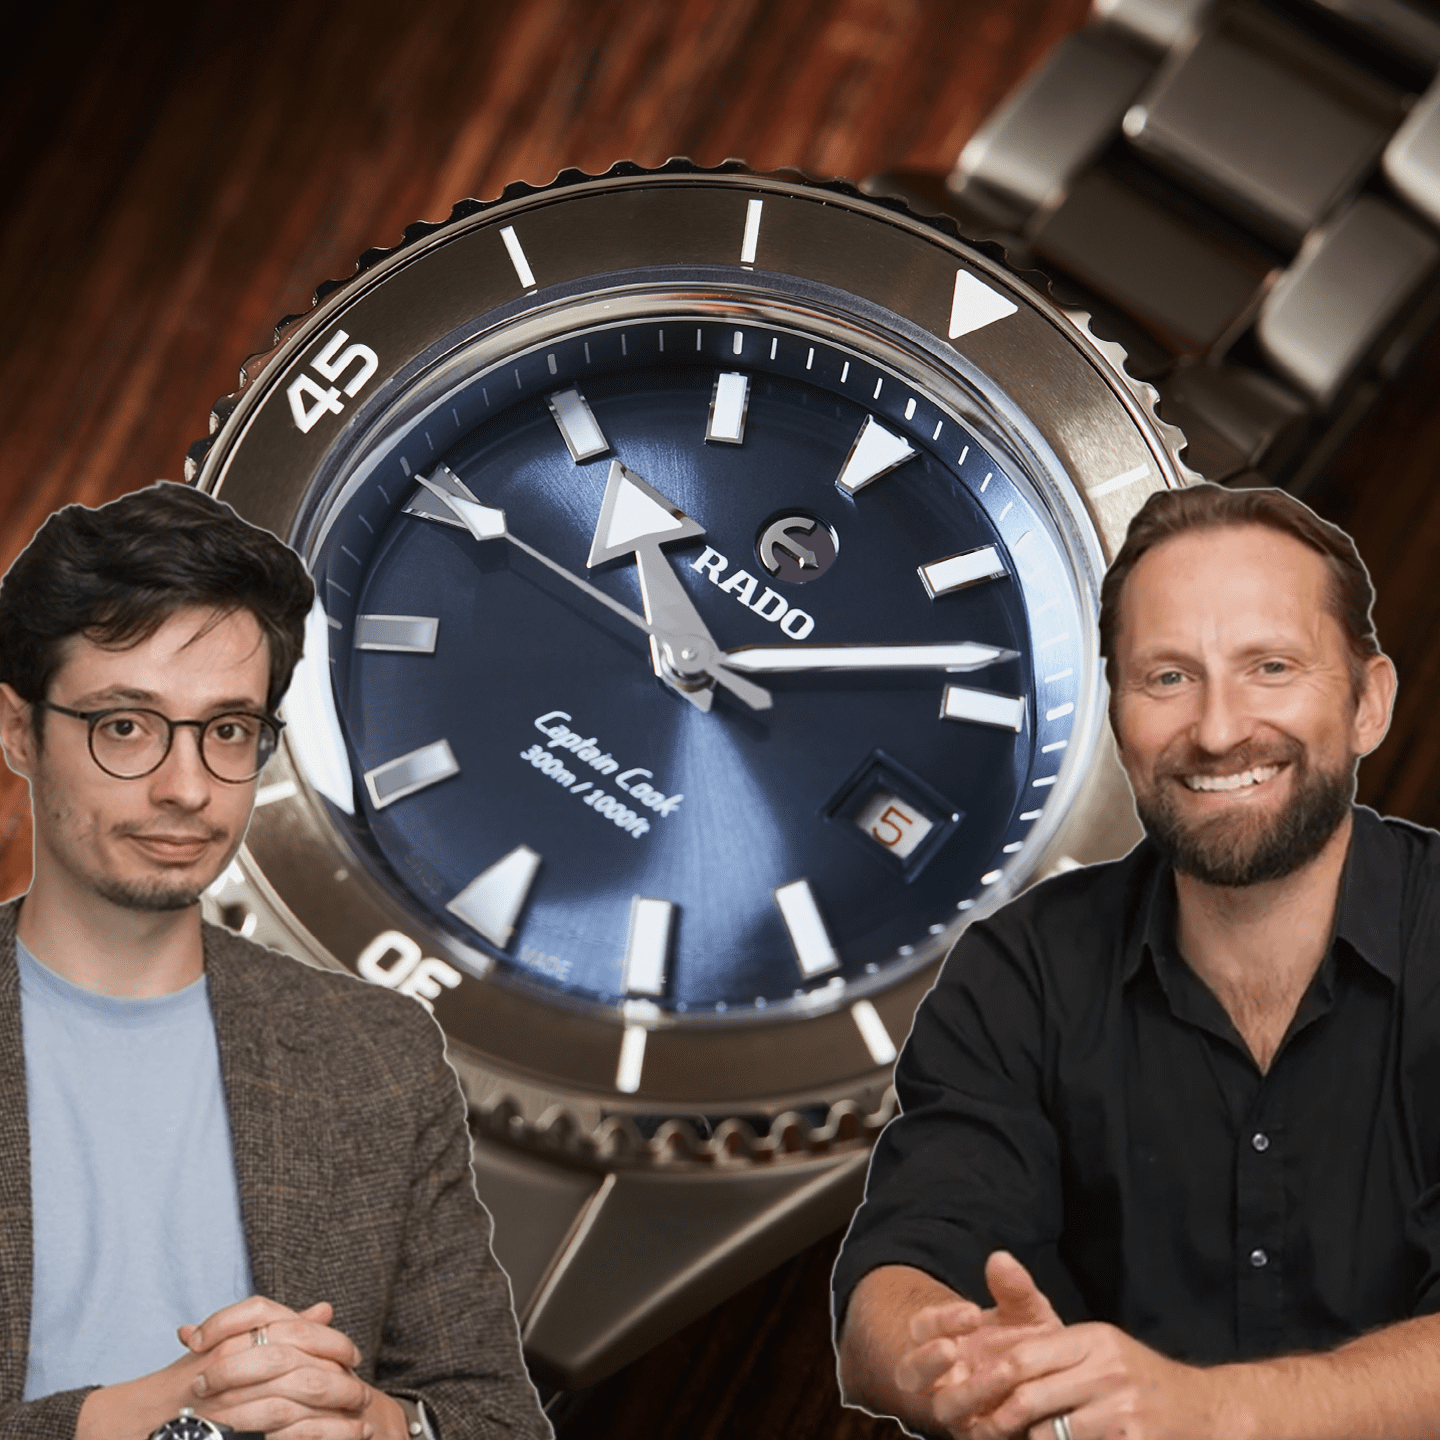 VIDEO: The evolution of the Rado Captain Cook continues with more high-tech ceramic models